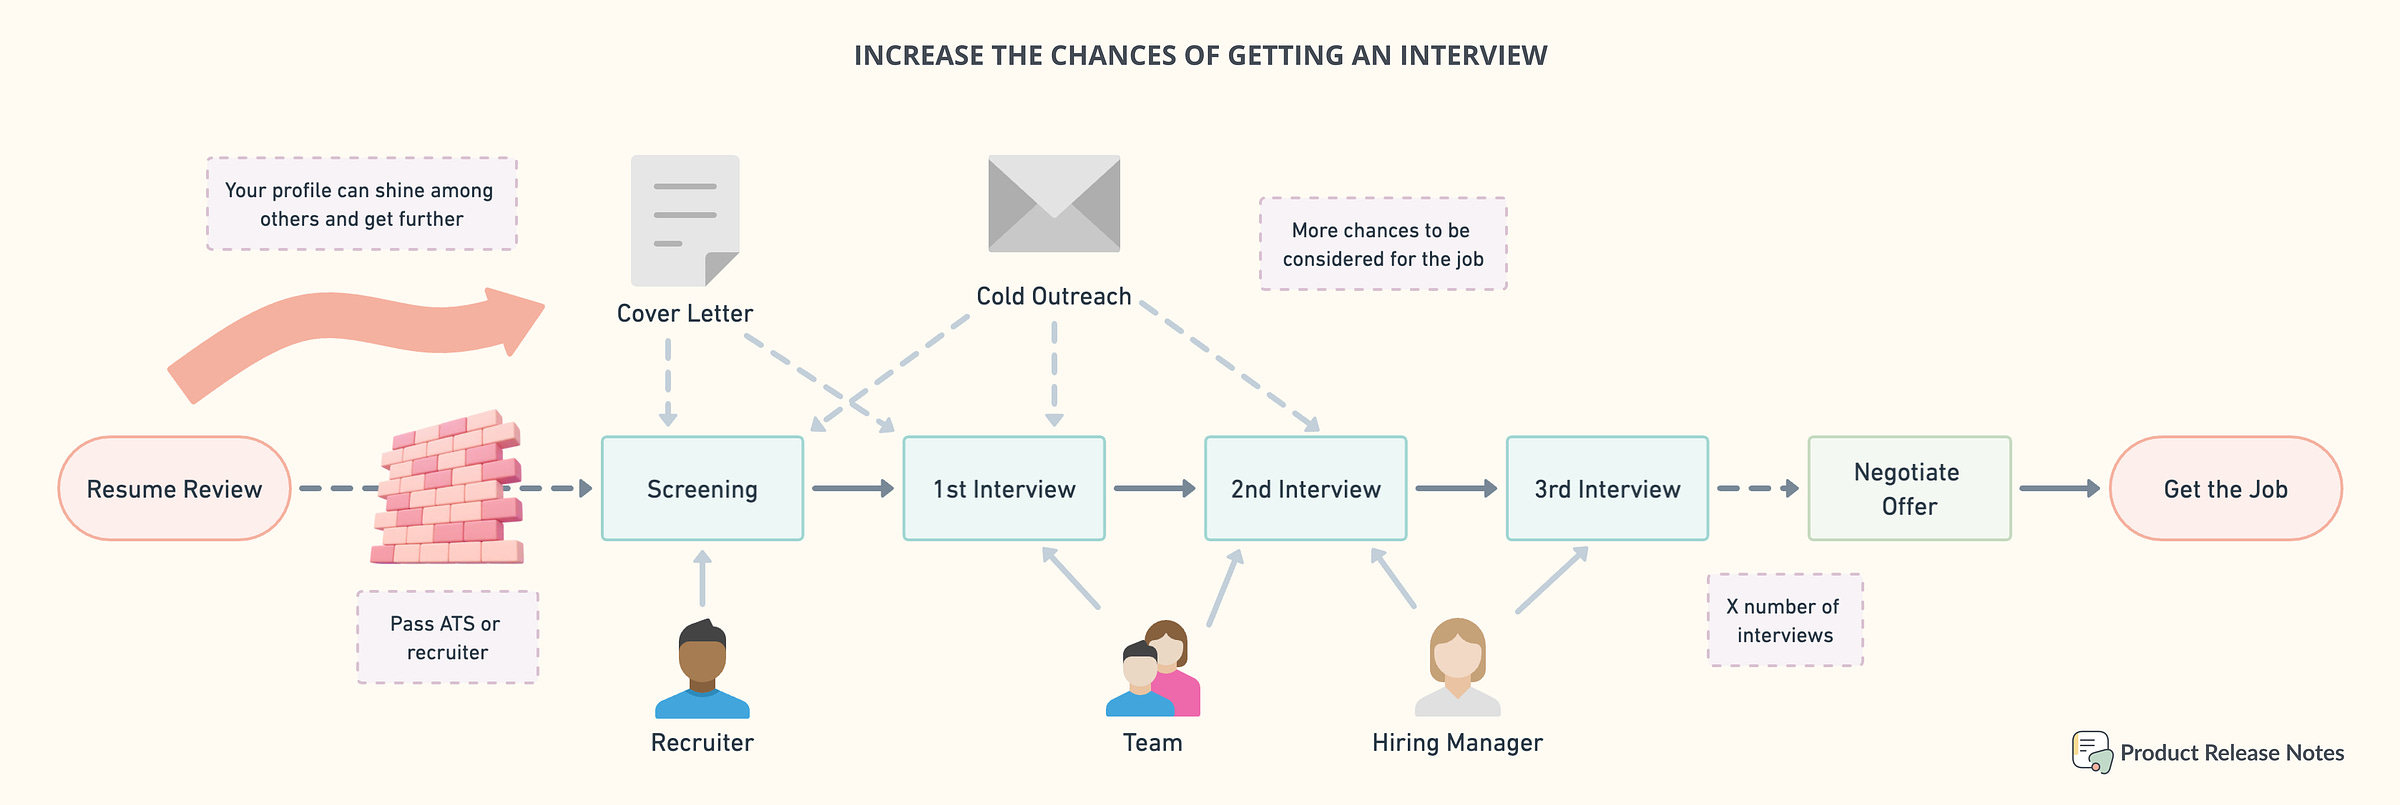 Increase the chances of getting an interview